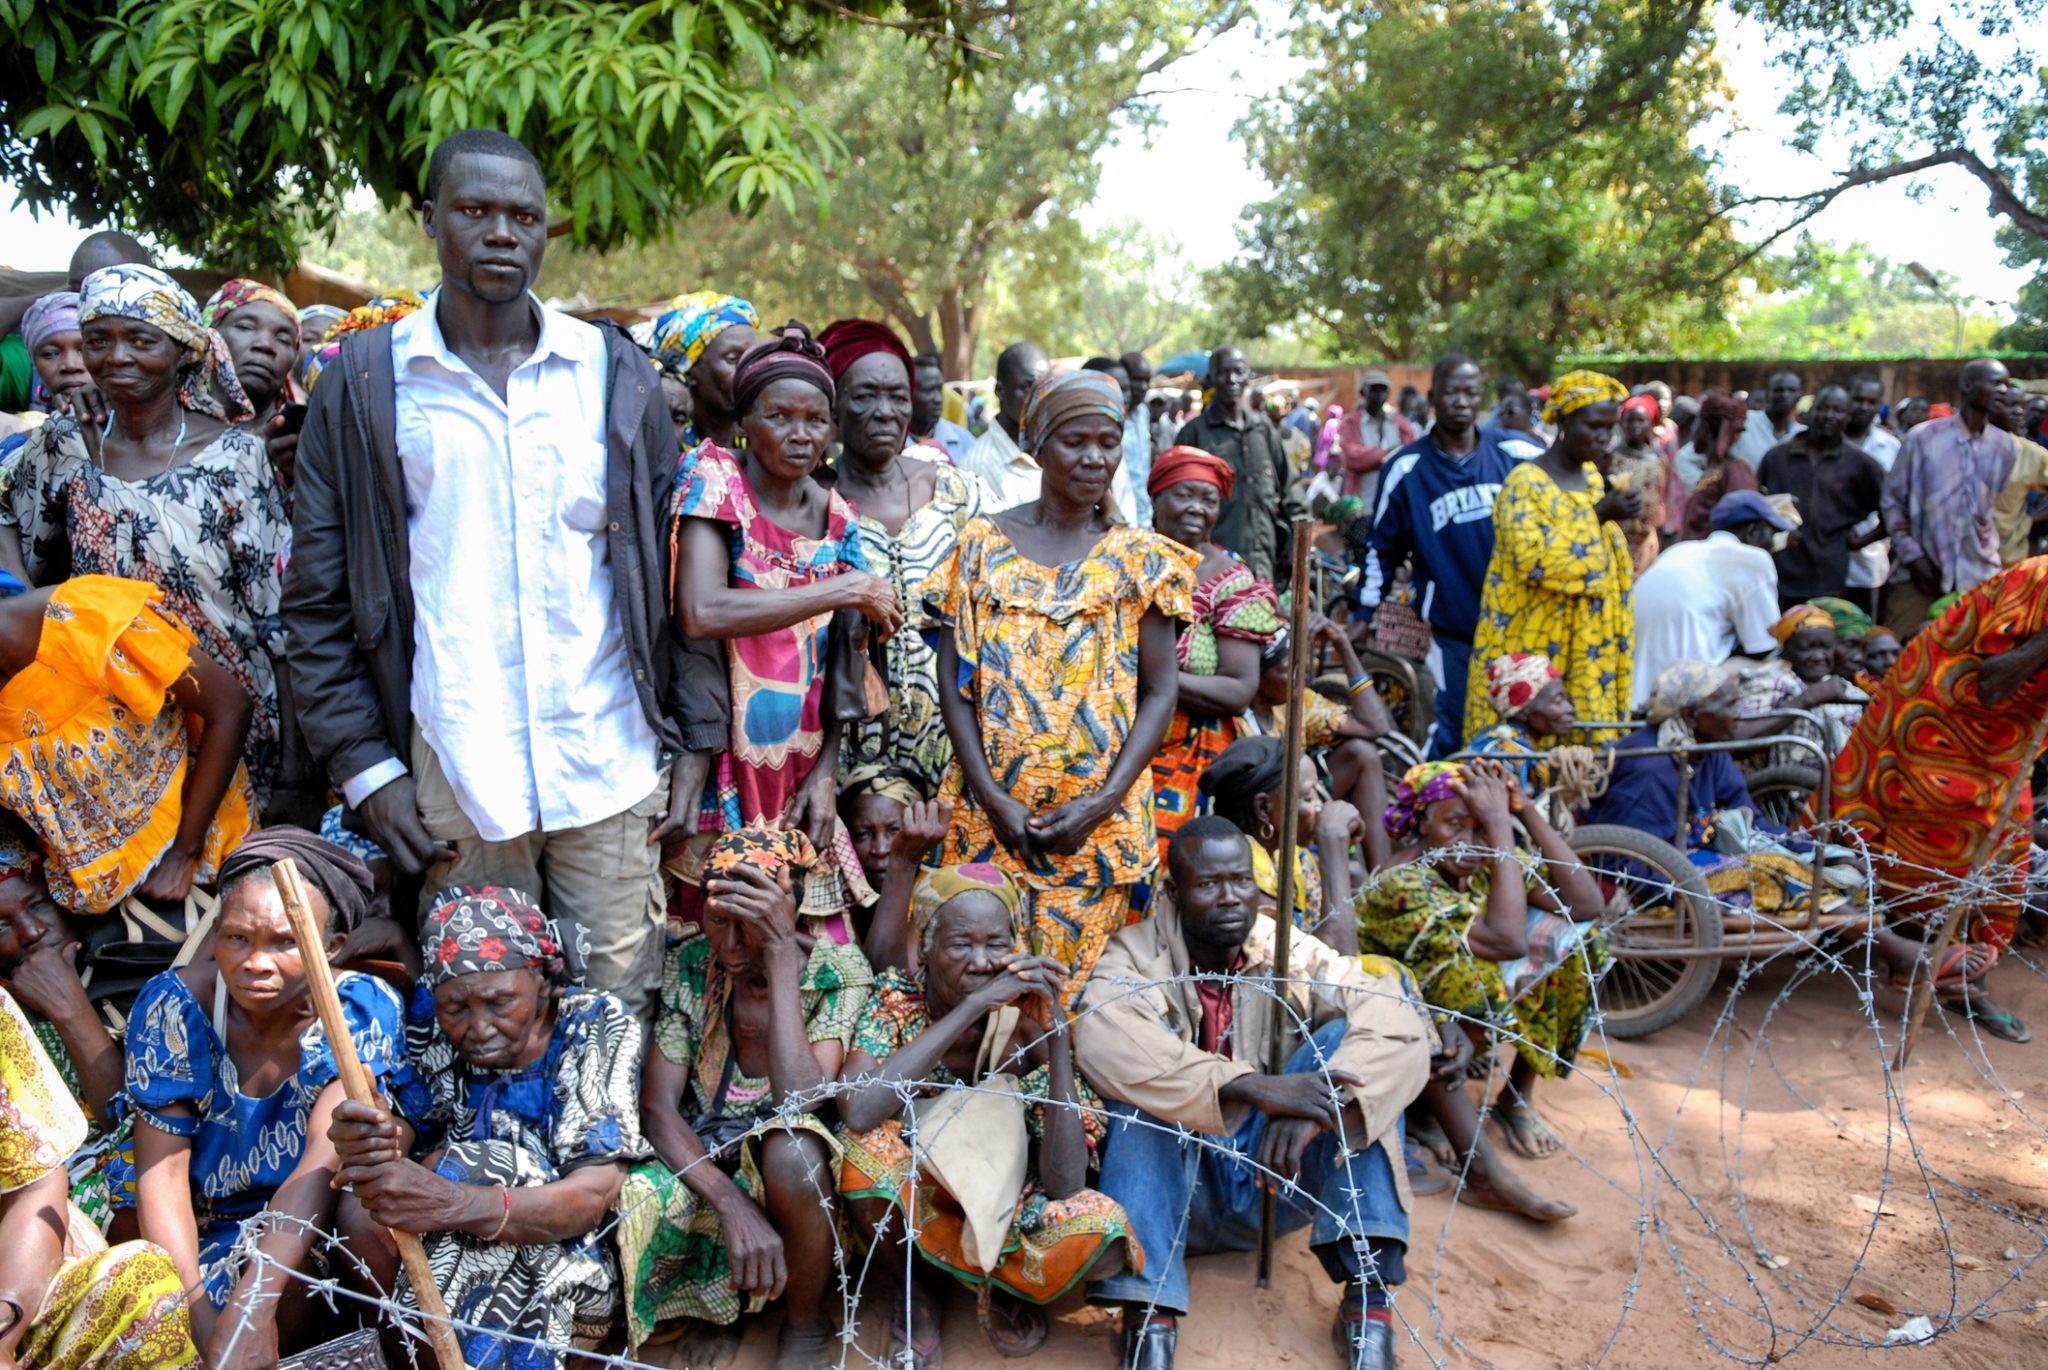 Farchana, Chad - October 30, 2012: In the photo we can see an African refugees who are ready to leave them country for having better life. They are wearing traditional clothes and waiting from early in the morning for the transportation.